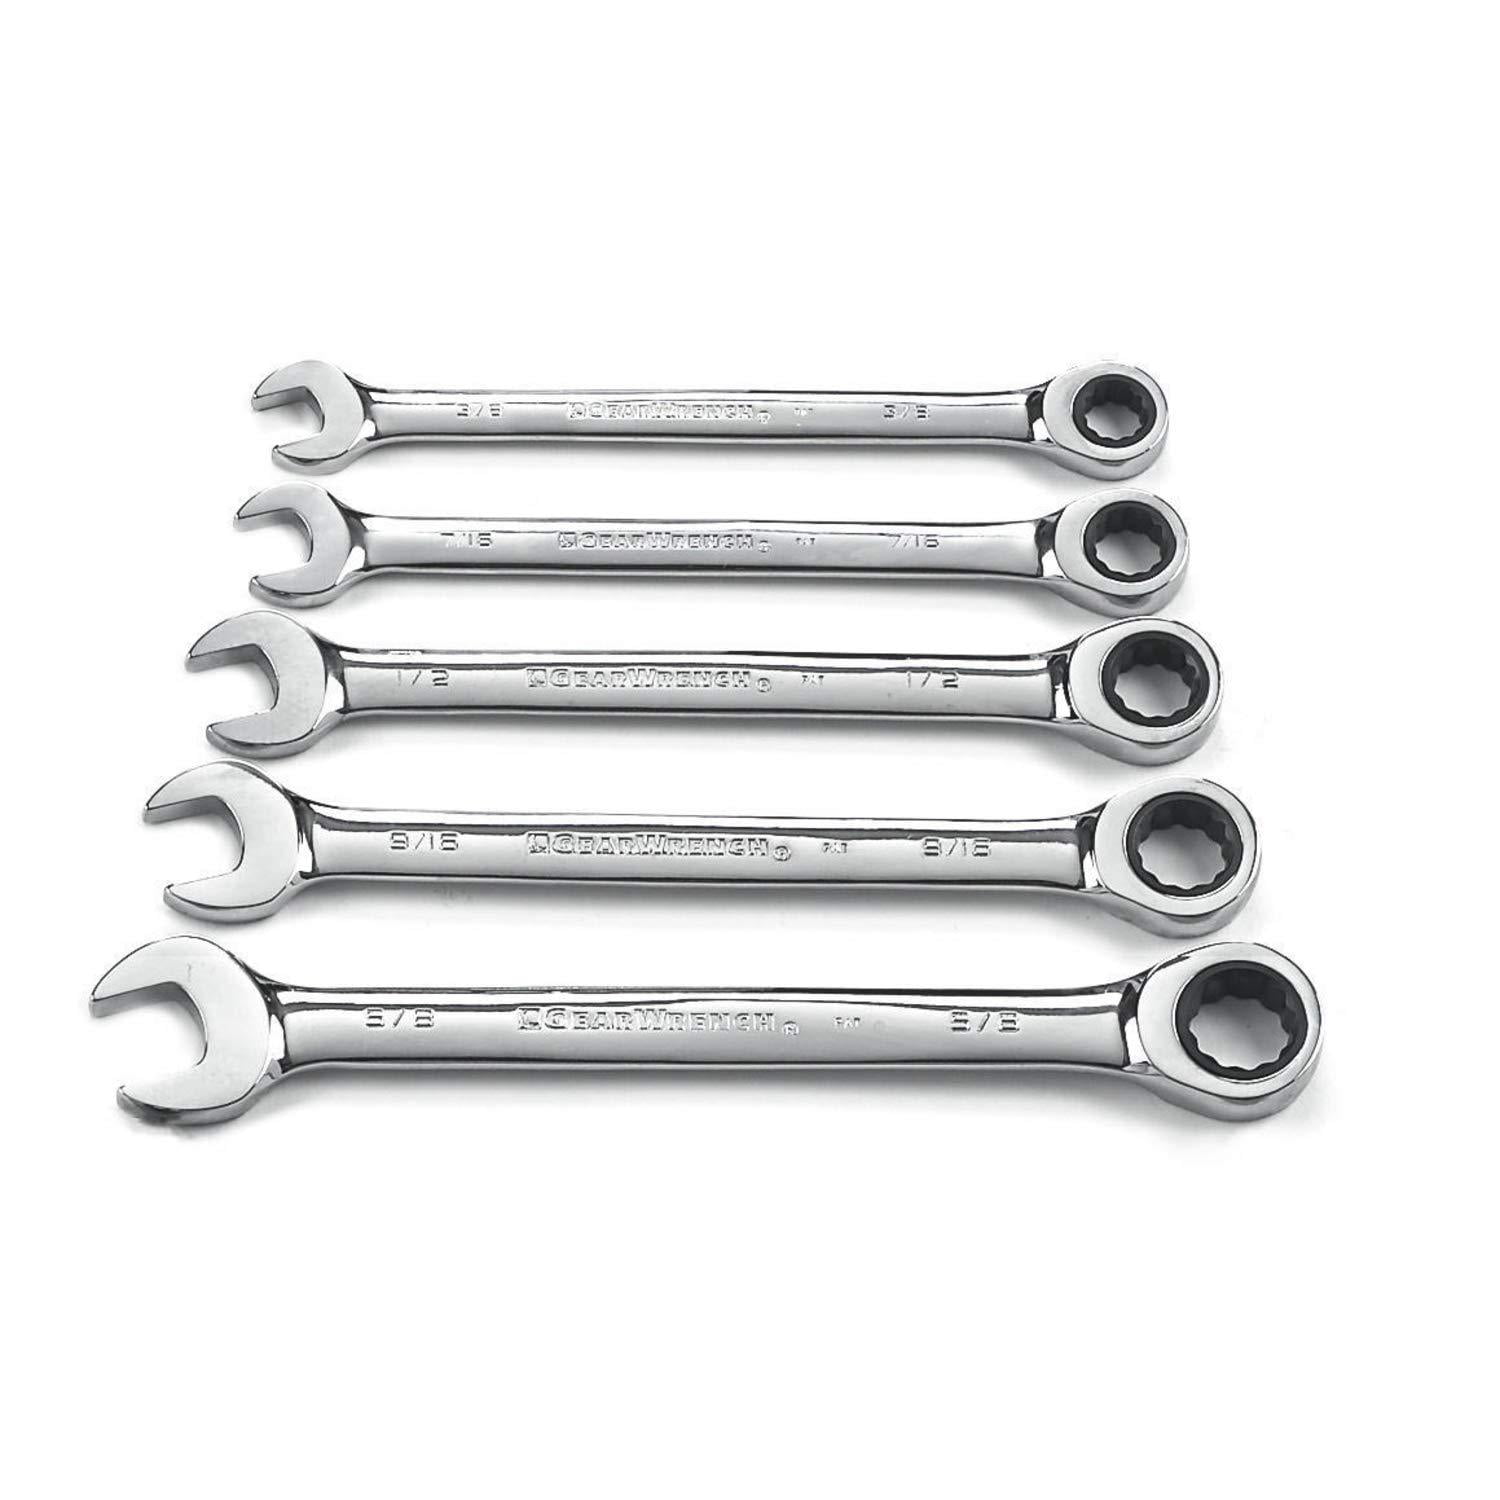 5PC SAE STANDARD SIZE BOX CLOSED END GEAR RATCHET RATCHETING WRENCH TOOL SET 